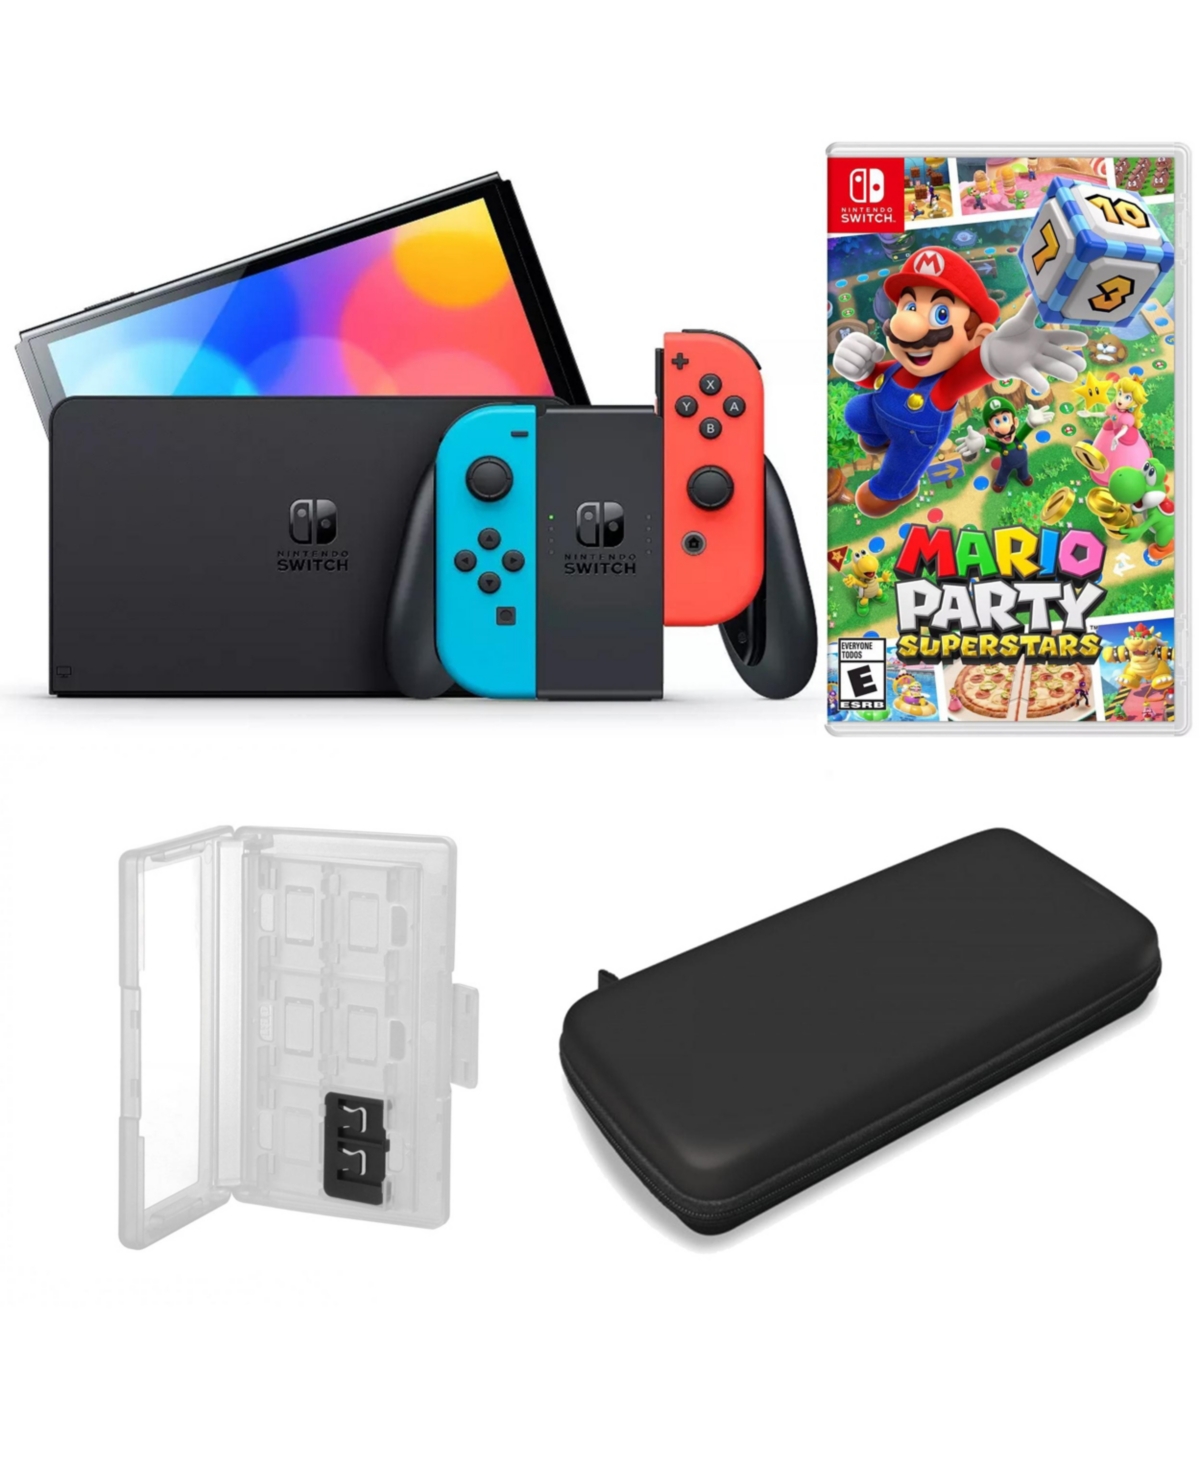 UPC 658580285883 product image for Nintendo Switch Oled in Neon with Mario Party Superstars & Accessories | upcitemdb.com